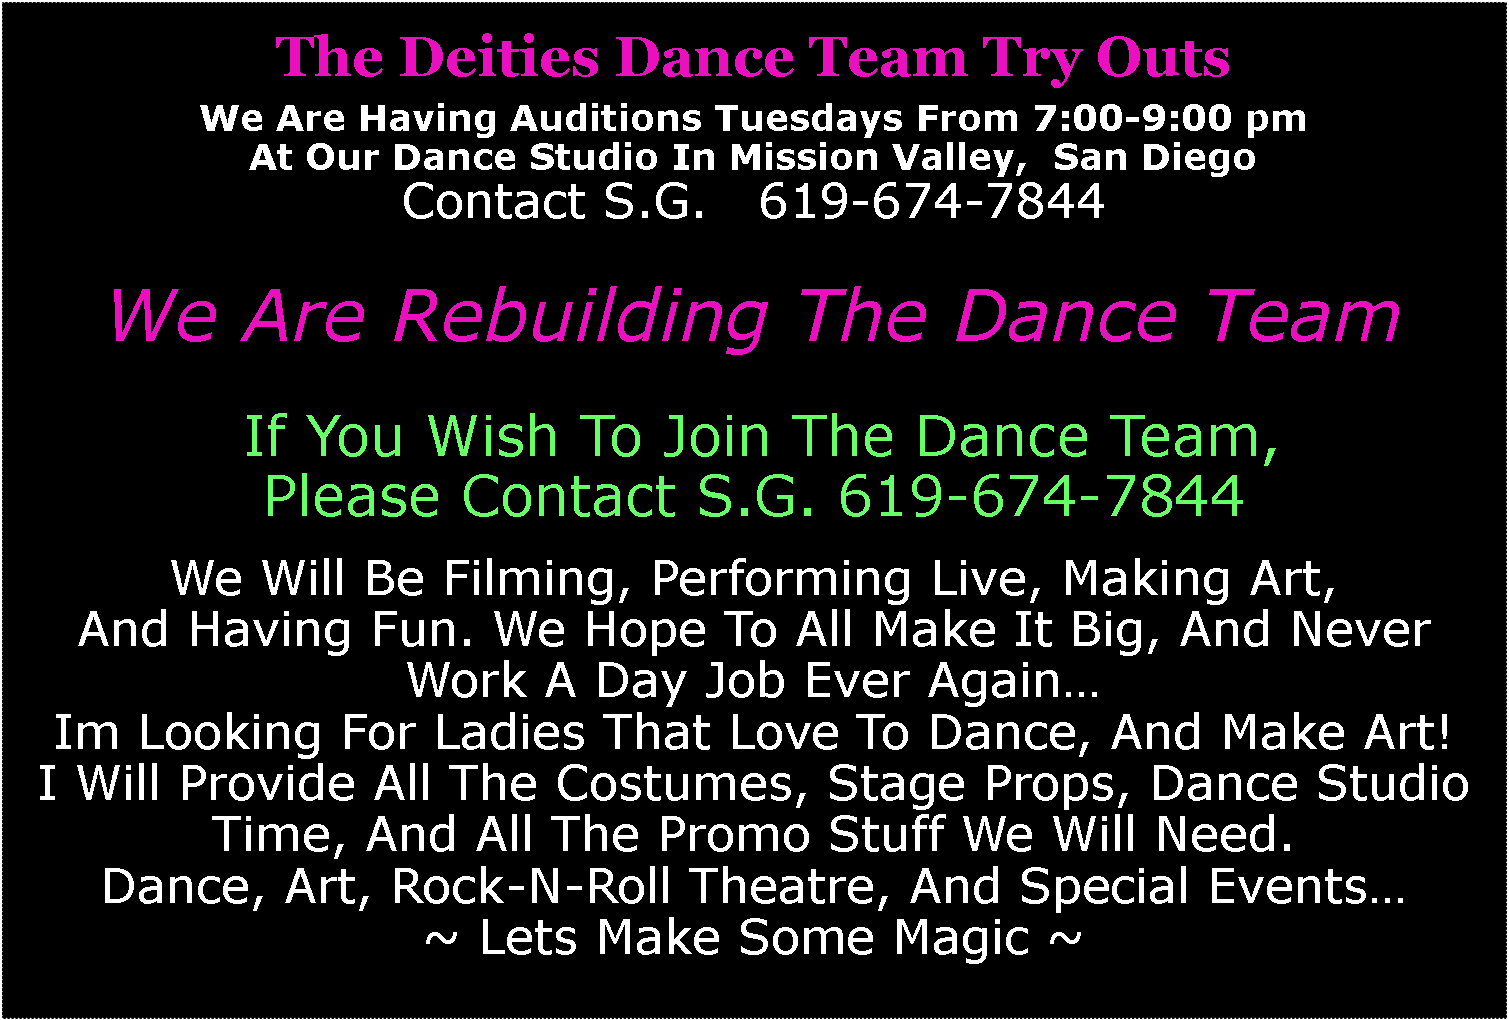 Text Box: The Deities Dance Team Try OutsWe Are Having Auditions Tuesdays From 7:00-9:00 pm At Our Dance Studio In Mission Valley,  San DiegoContact S.G.   619-674-7844We Are Rebuilding The Dance Team  If You Wish To Join The Dance Team,Please Contact S.G. 619-674-7844We Will Be Filming, Performing Live, Making Art,And Having Fun. We Hope To All Make It Big, And Never Work A Day Job Ever Again…Im Looking For Ladies That Love To Dance, And Make Art!I Will Provide All The Costumes, Stage Props, Dance Studio Time, And All The Promo Stuff We Will Need.Dance, Art, Rock-N-Roll Theatre, And Special Events…~ Lets Make Some Magic ~